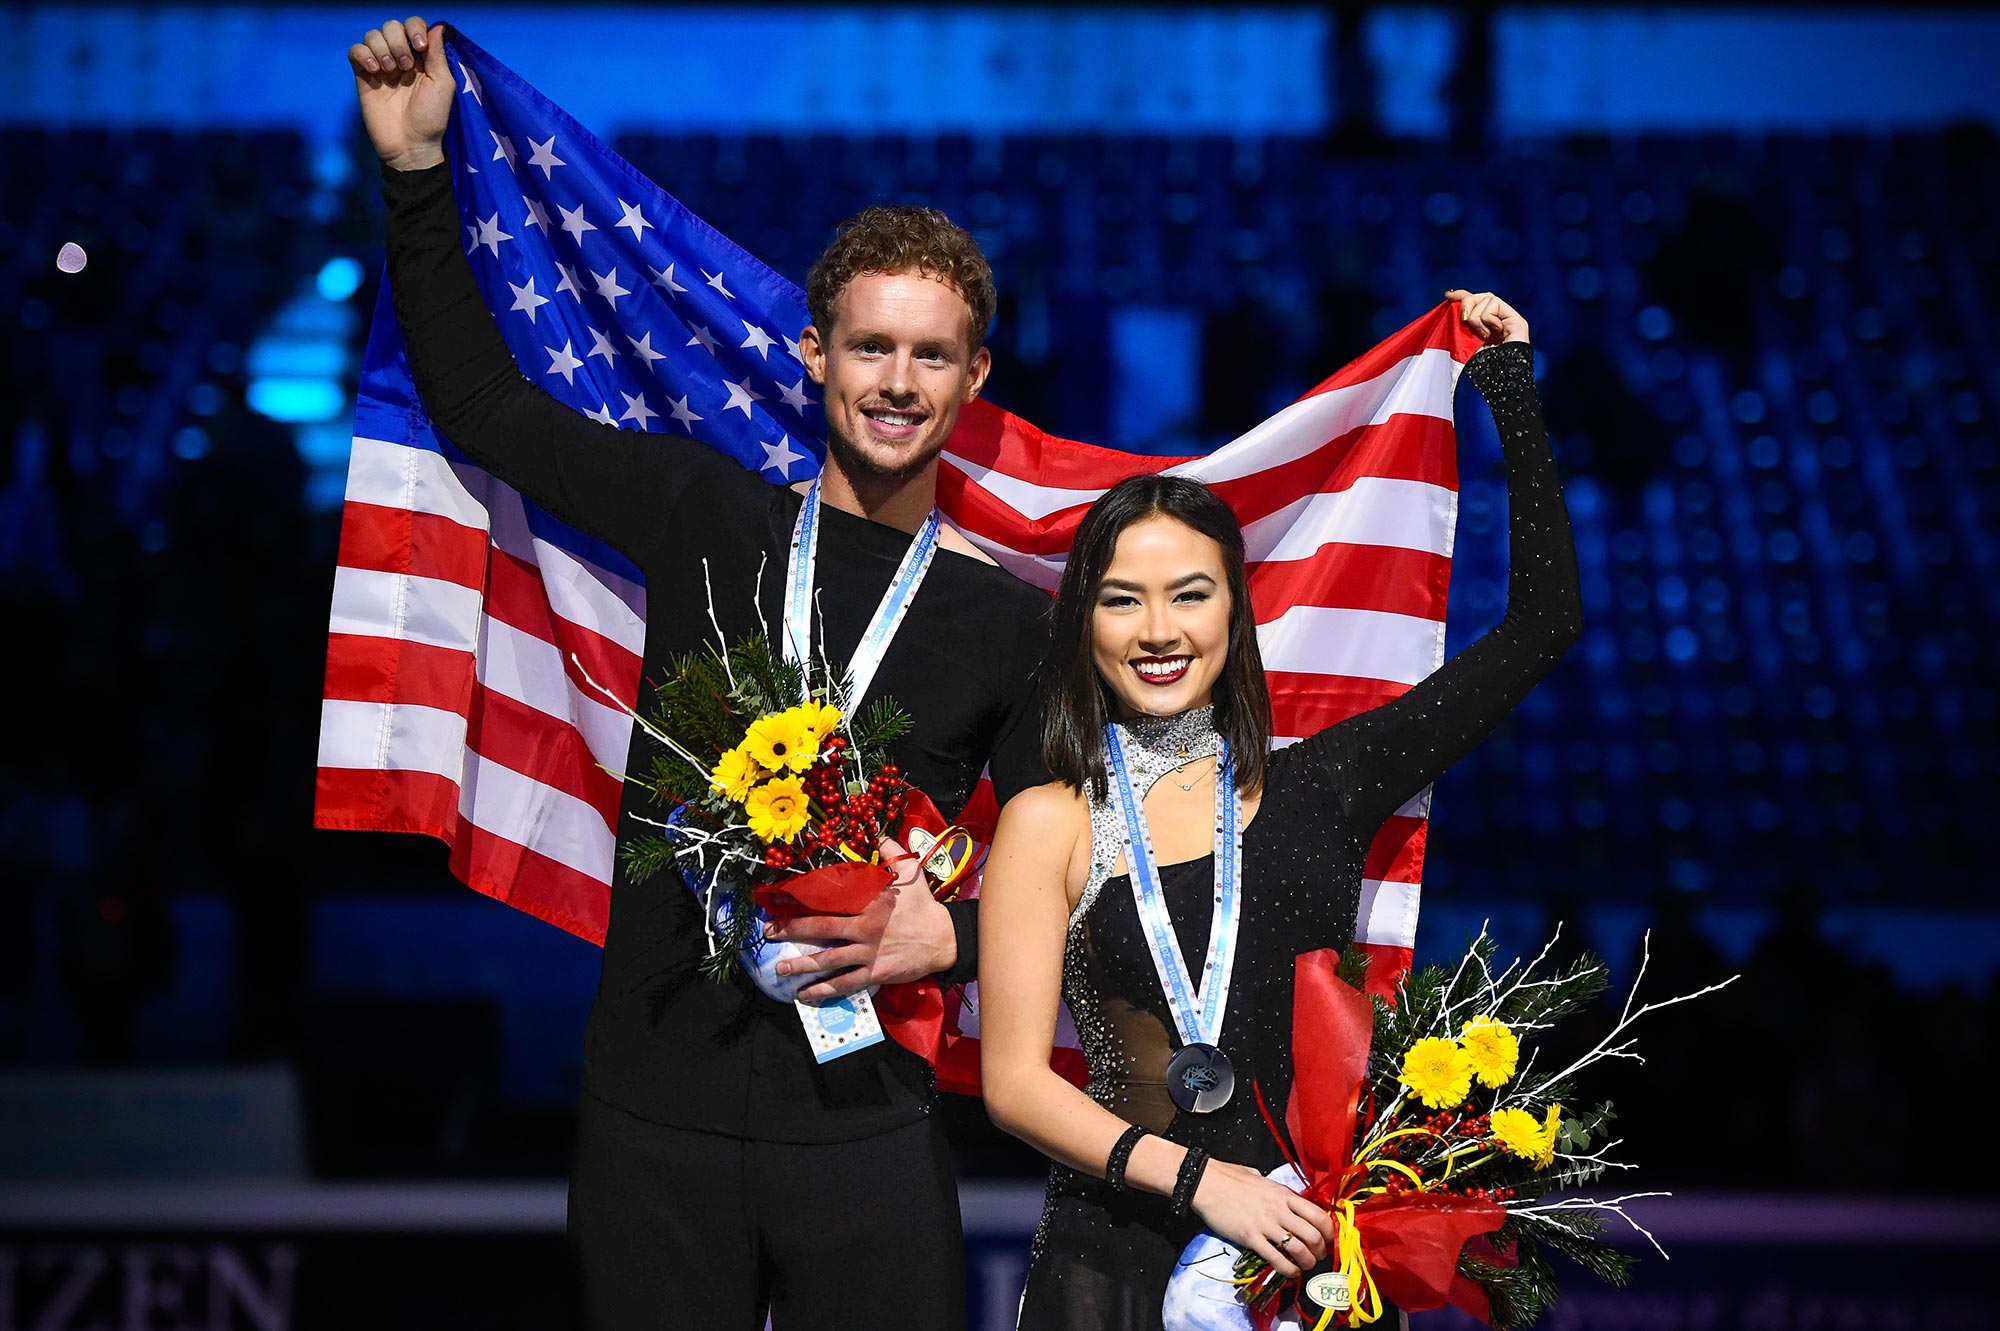 Engaged Olympic Ice Dancers Evan Bates and Madison Chock Win Gold at Worlds